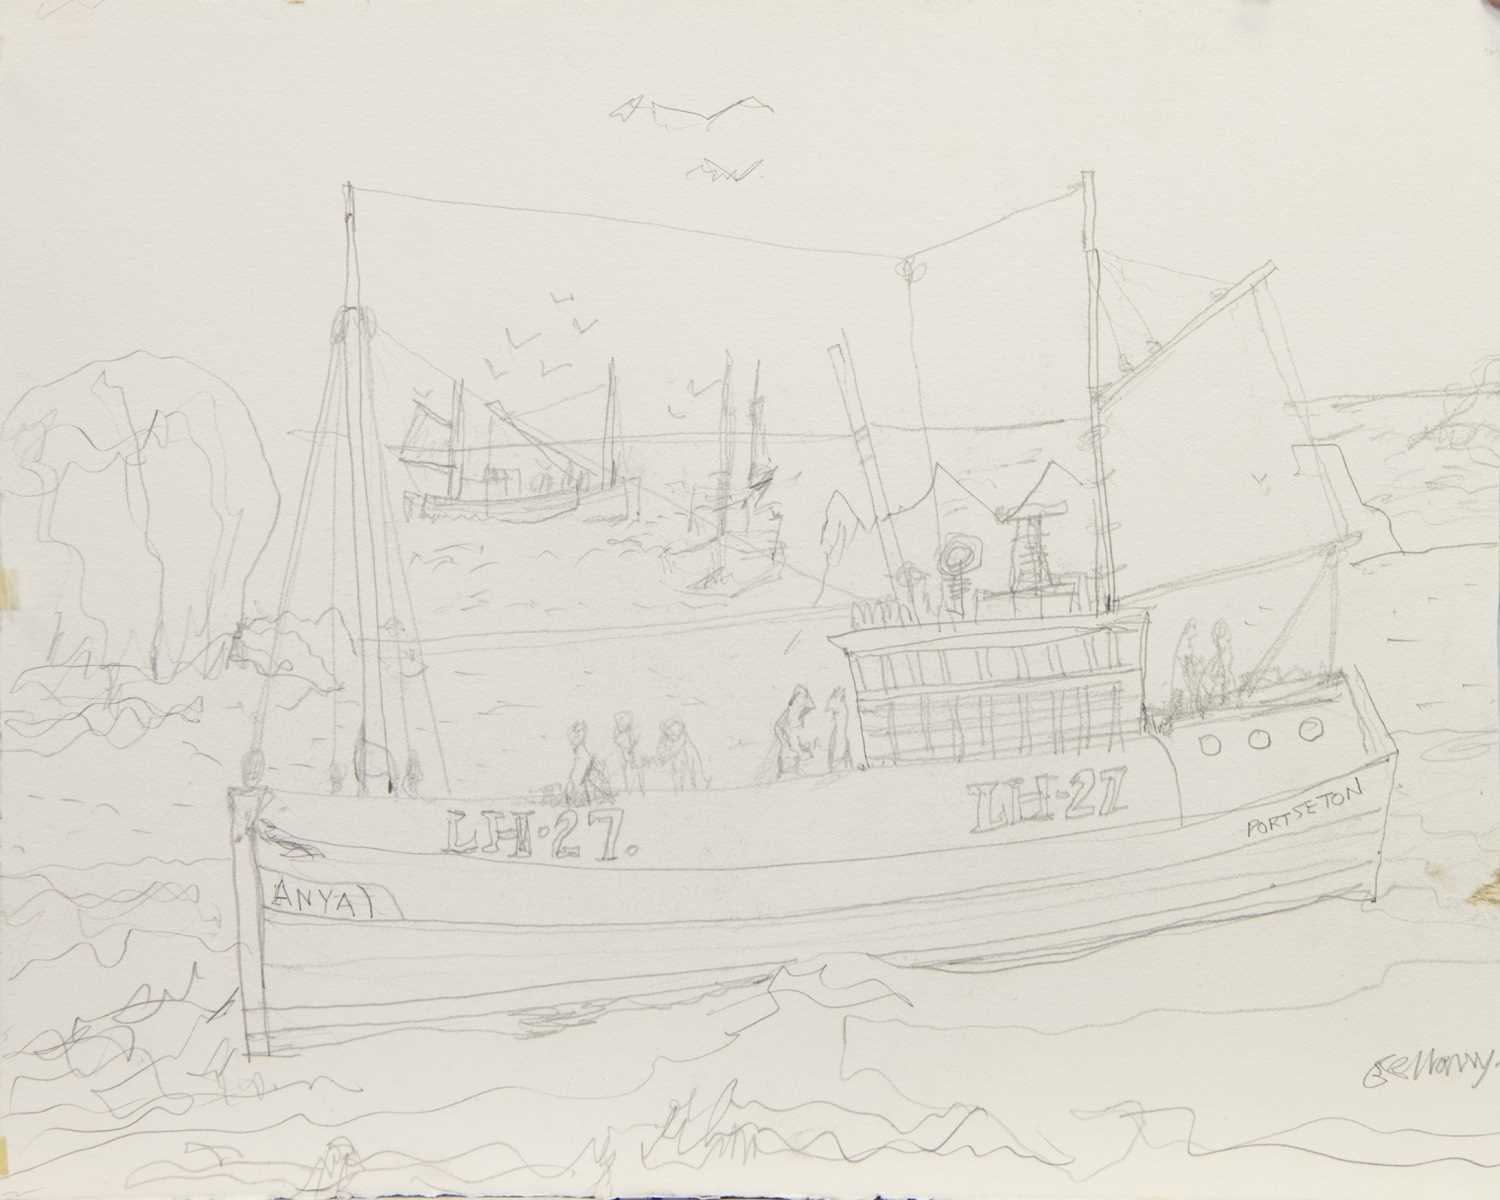 Lot 674 - LH-27, A PENCIL ON PAPER BY JOHN BELLANY